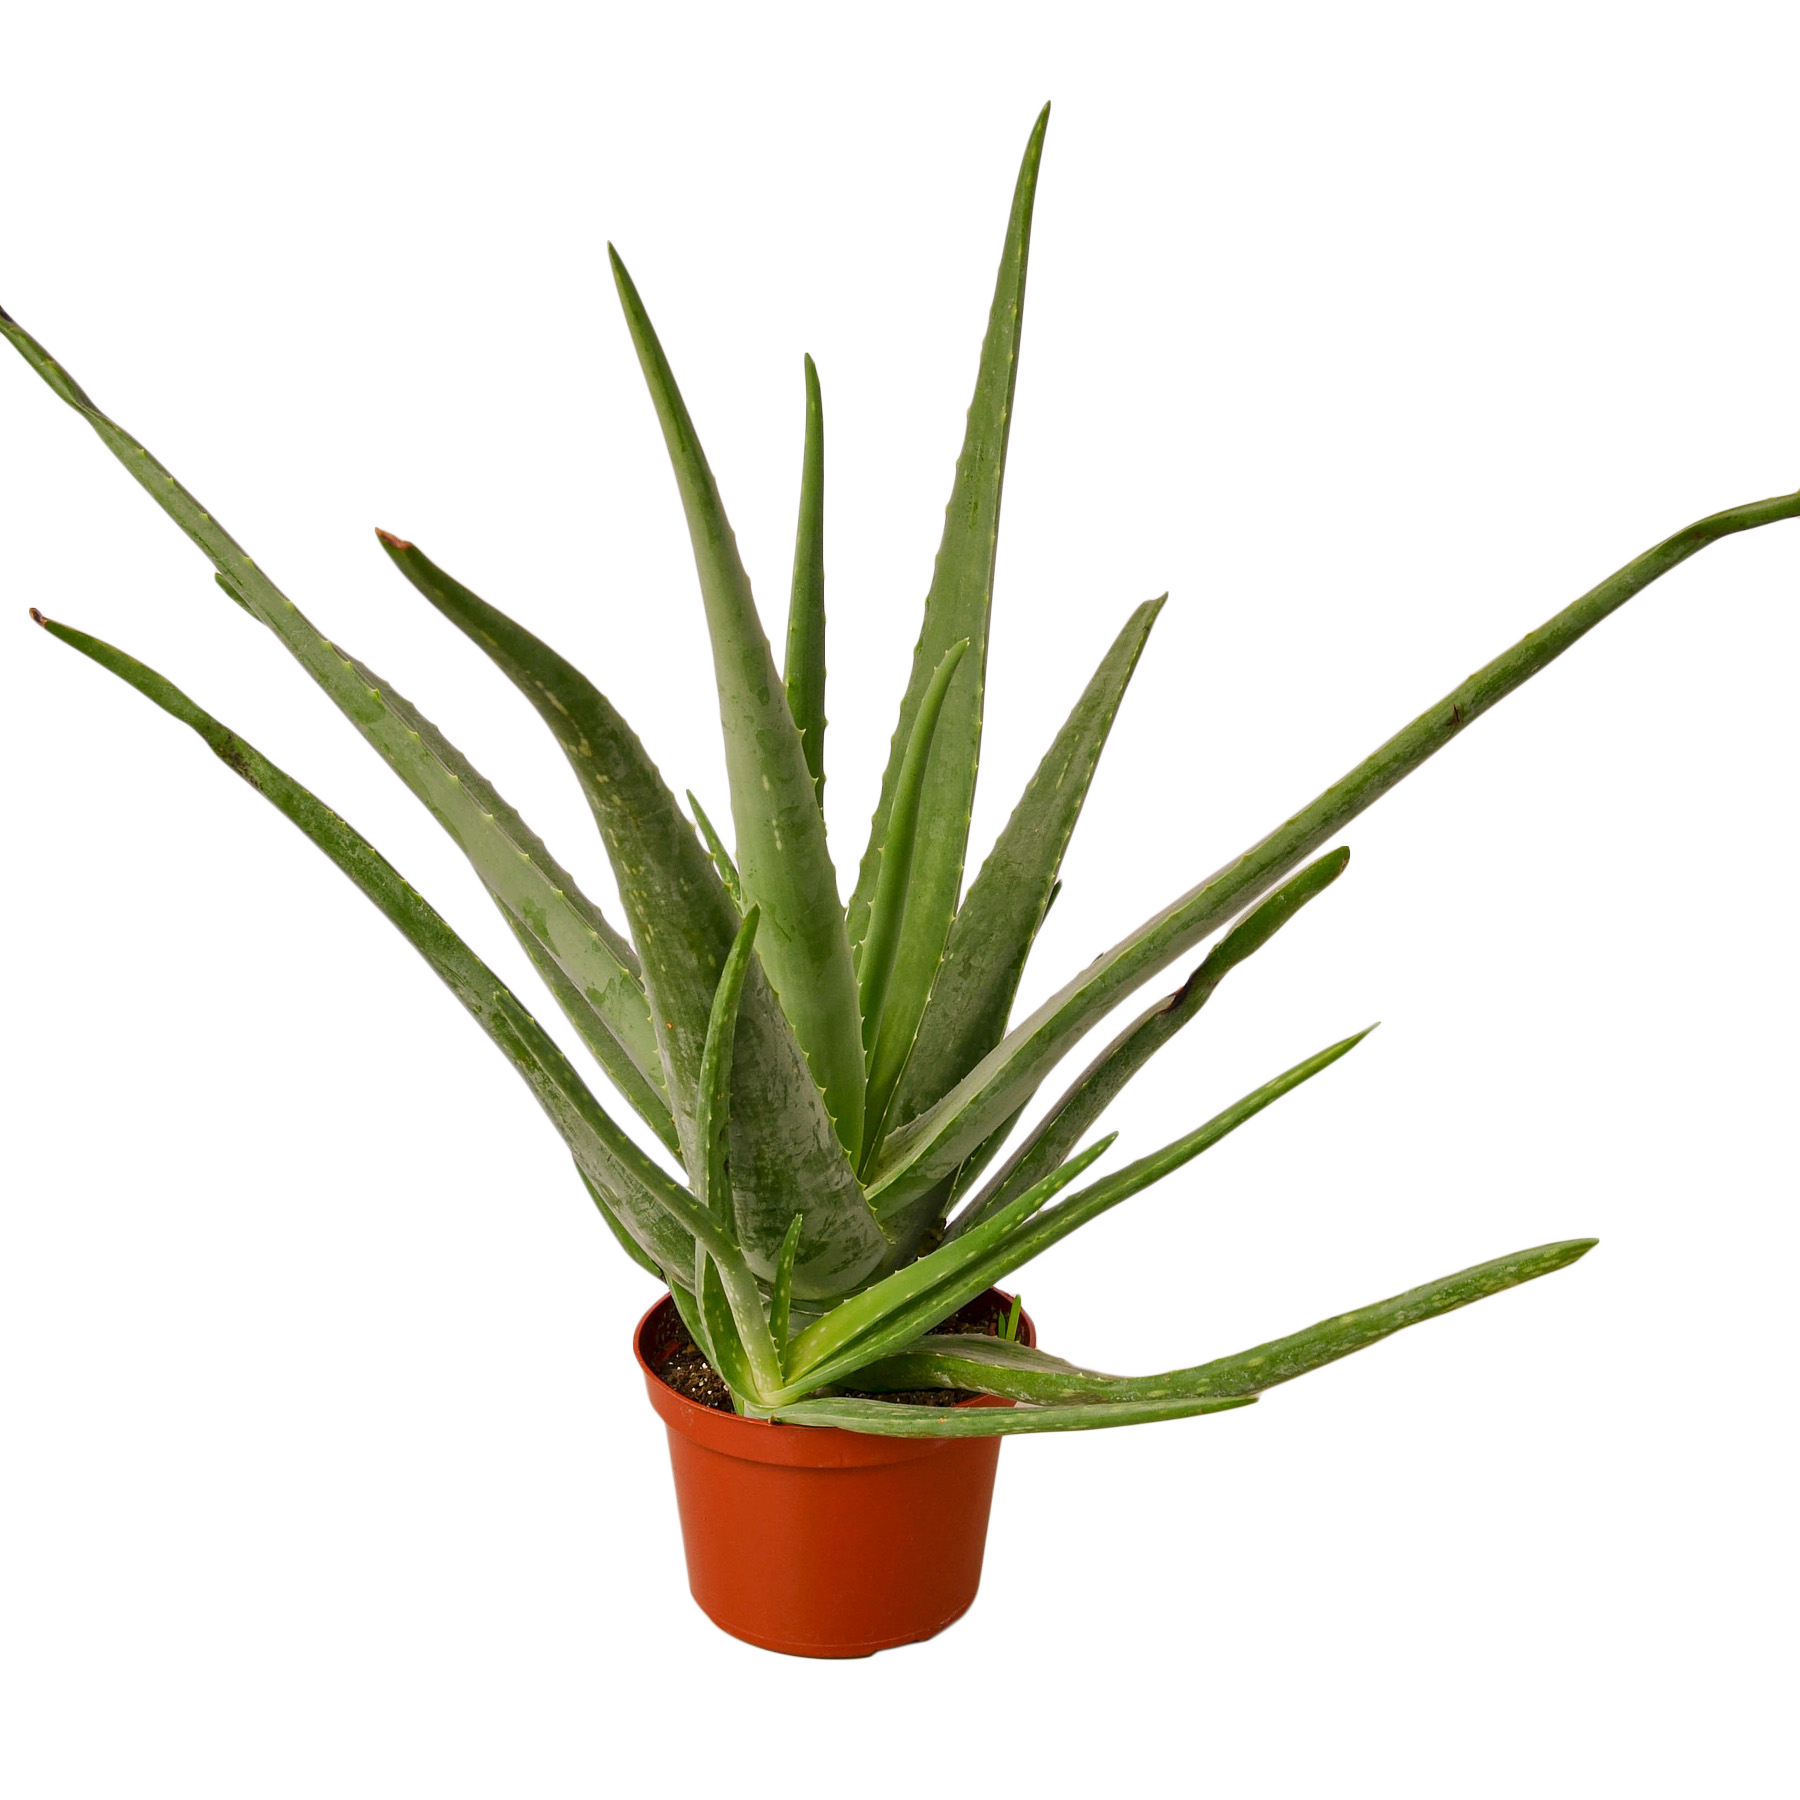 Aloe vera plant in a pot on a white background, available at the best garden nursery near me.